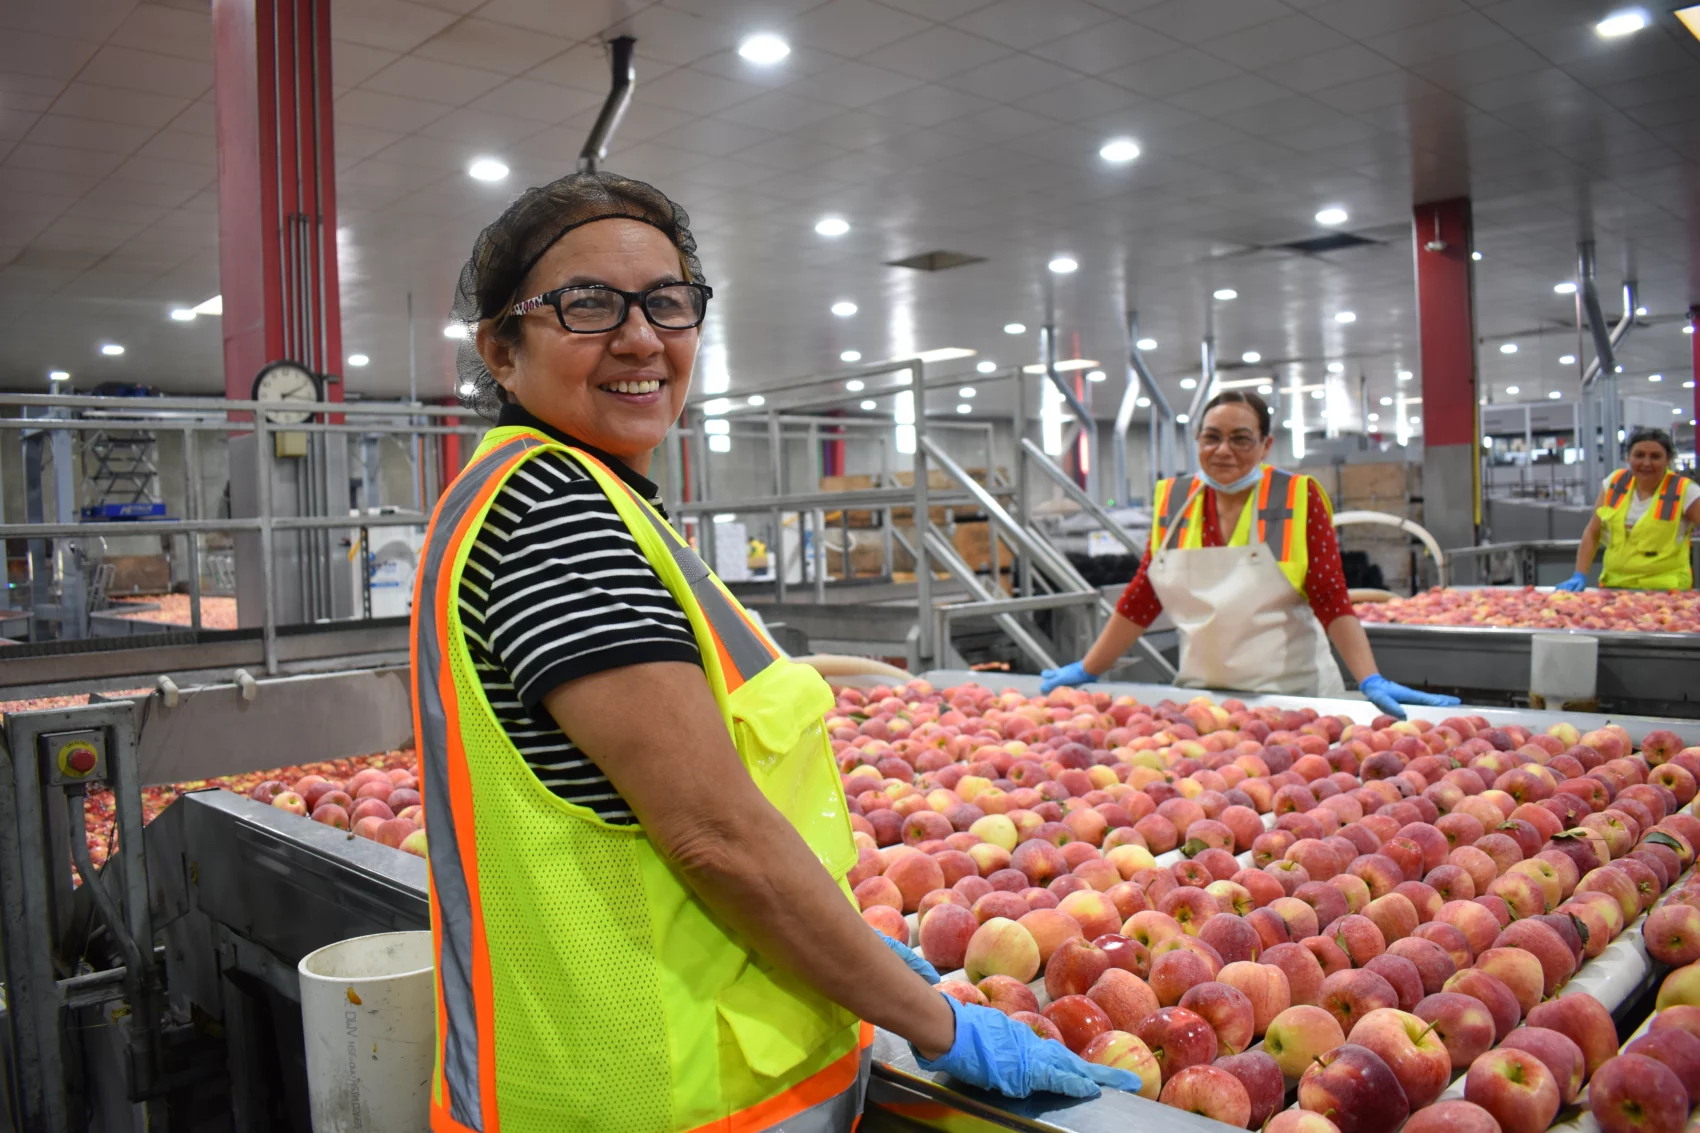 Apple packing workers with apples to grade and pack.